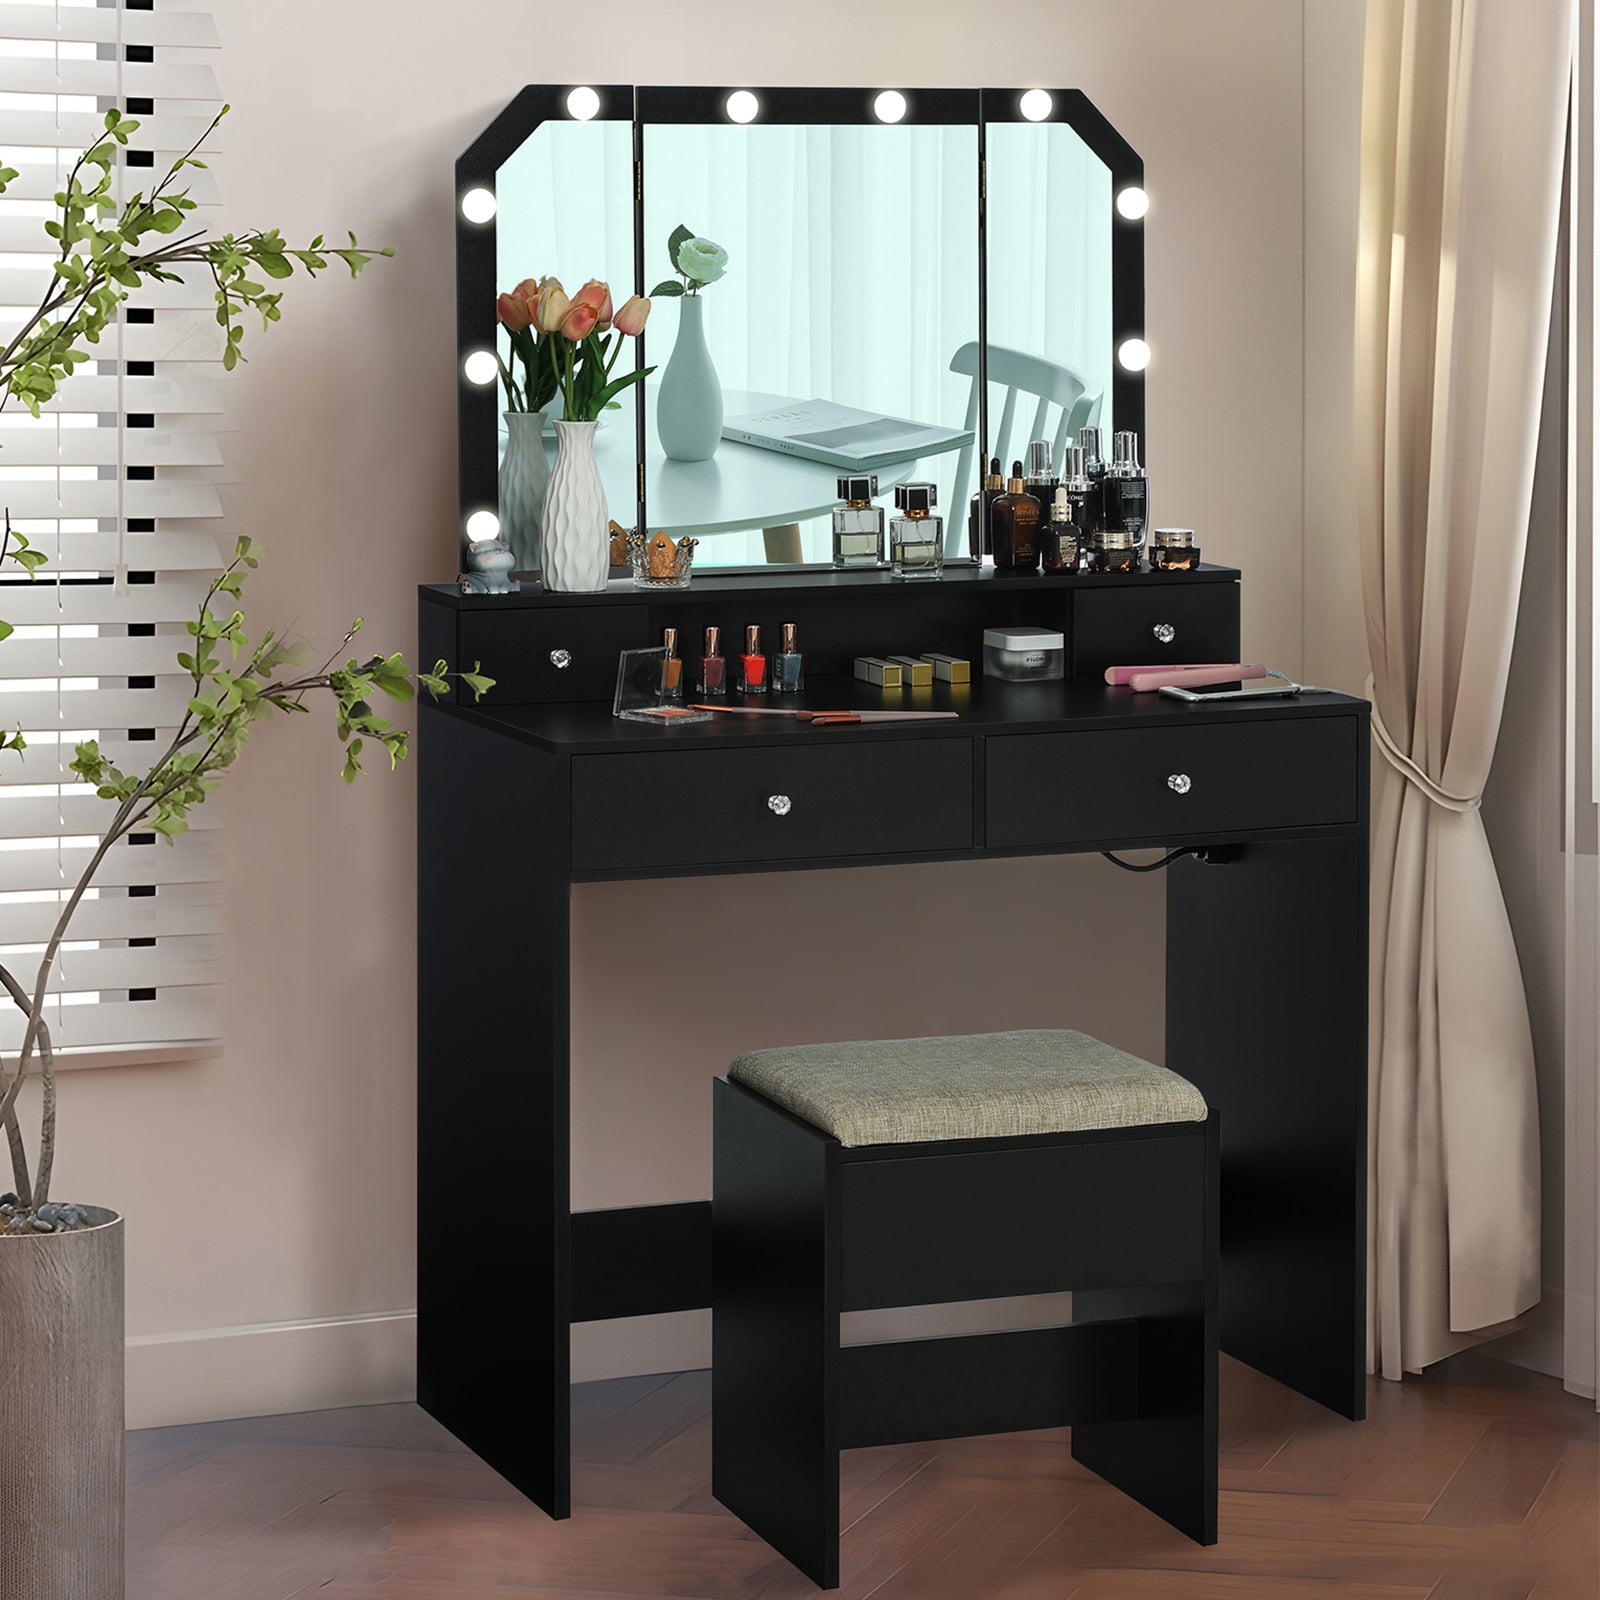 Buy KAILA Make-up Mirror Stand LED Black 30x41 cm here 